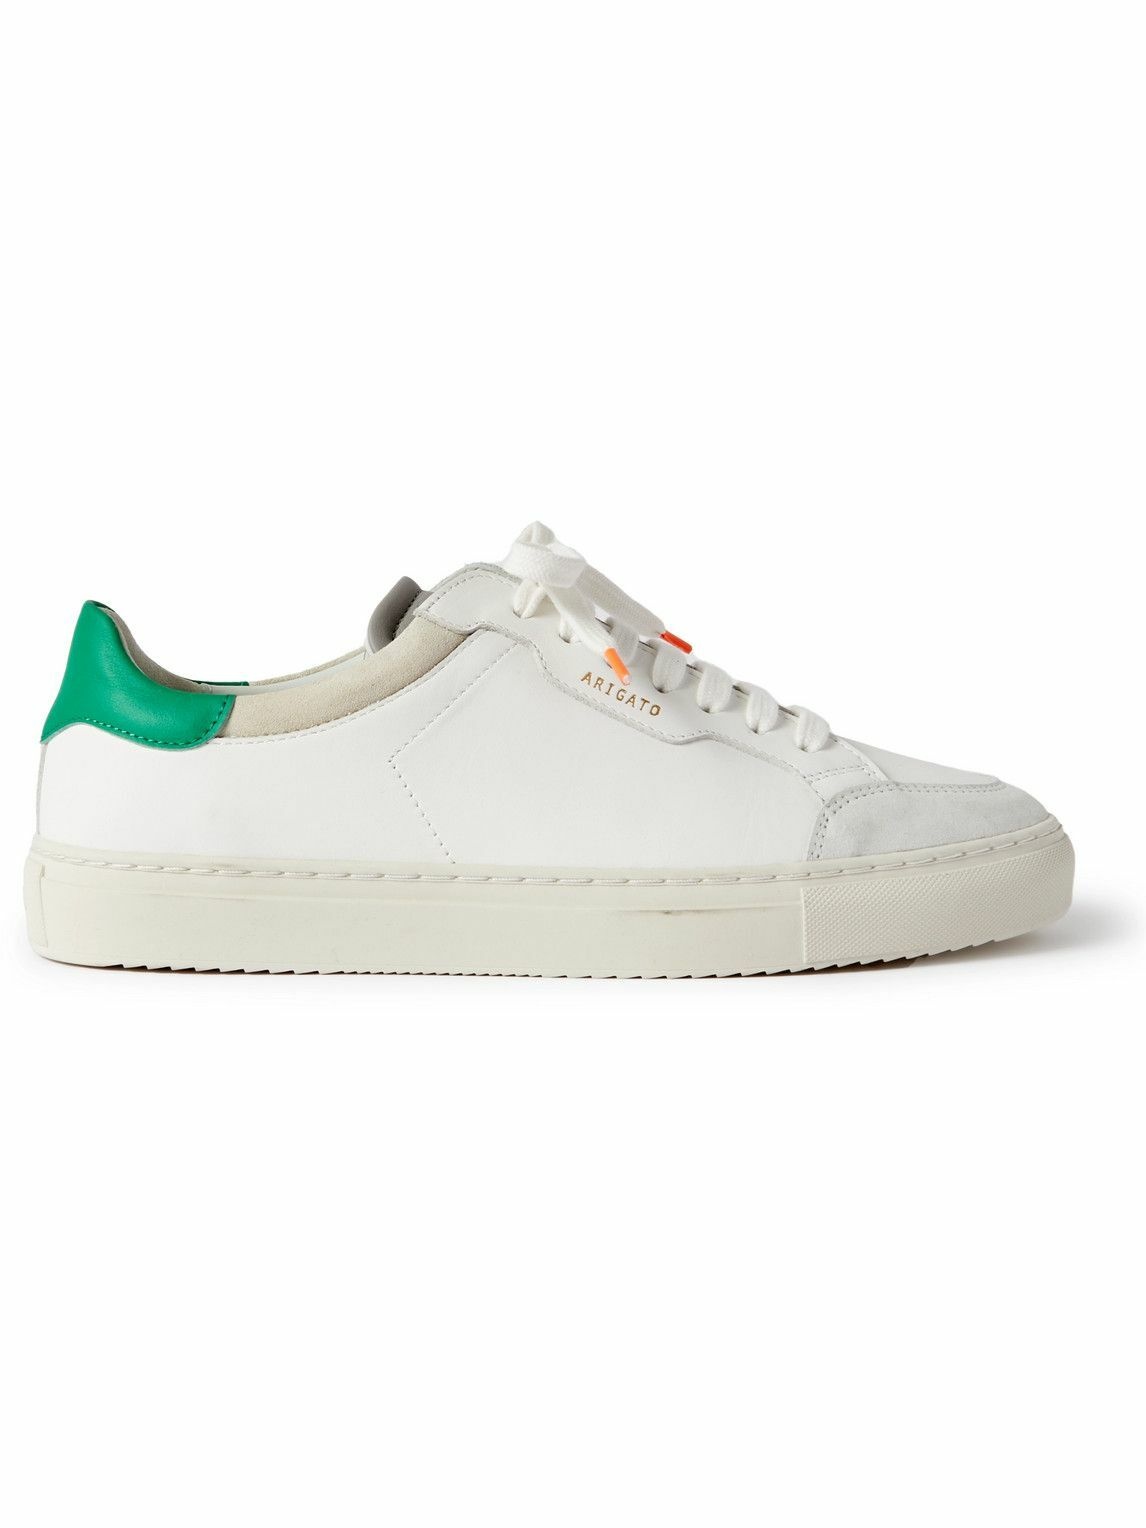 Axel Arigato - Clean 180 Nubuck-Trimmed Leather Sneakers - White Axel ...